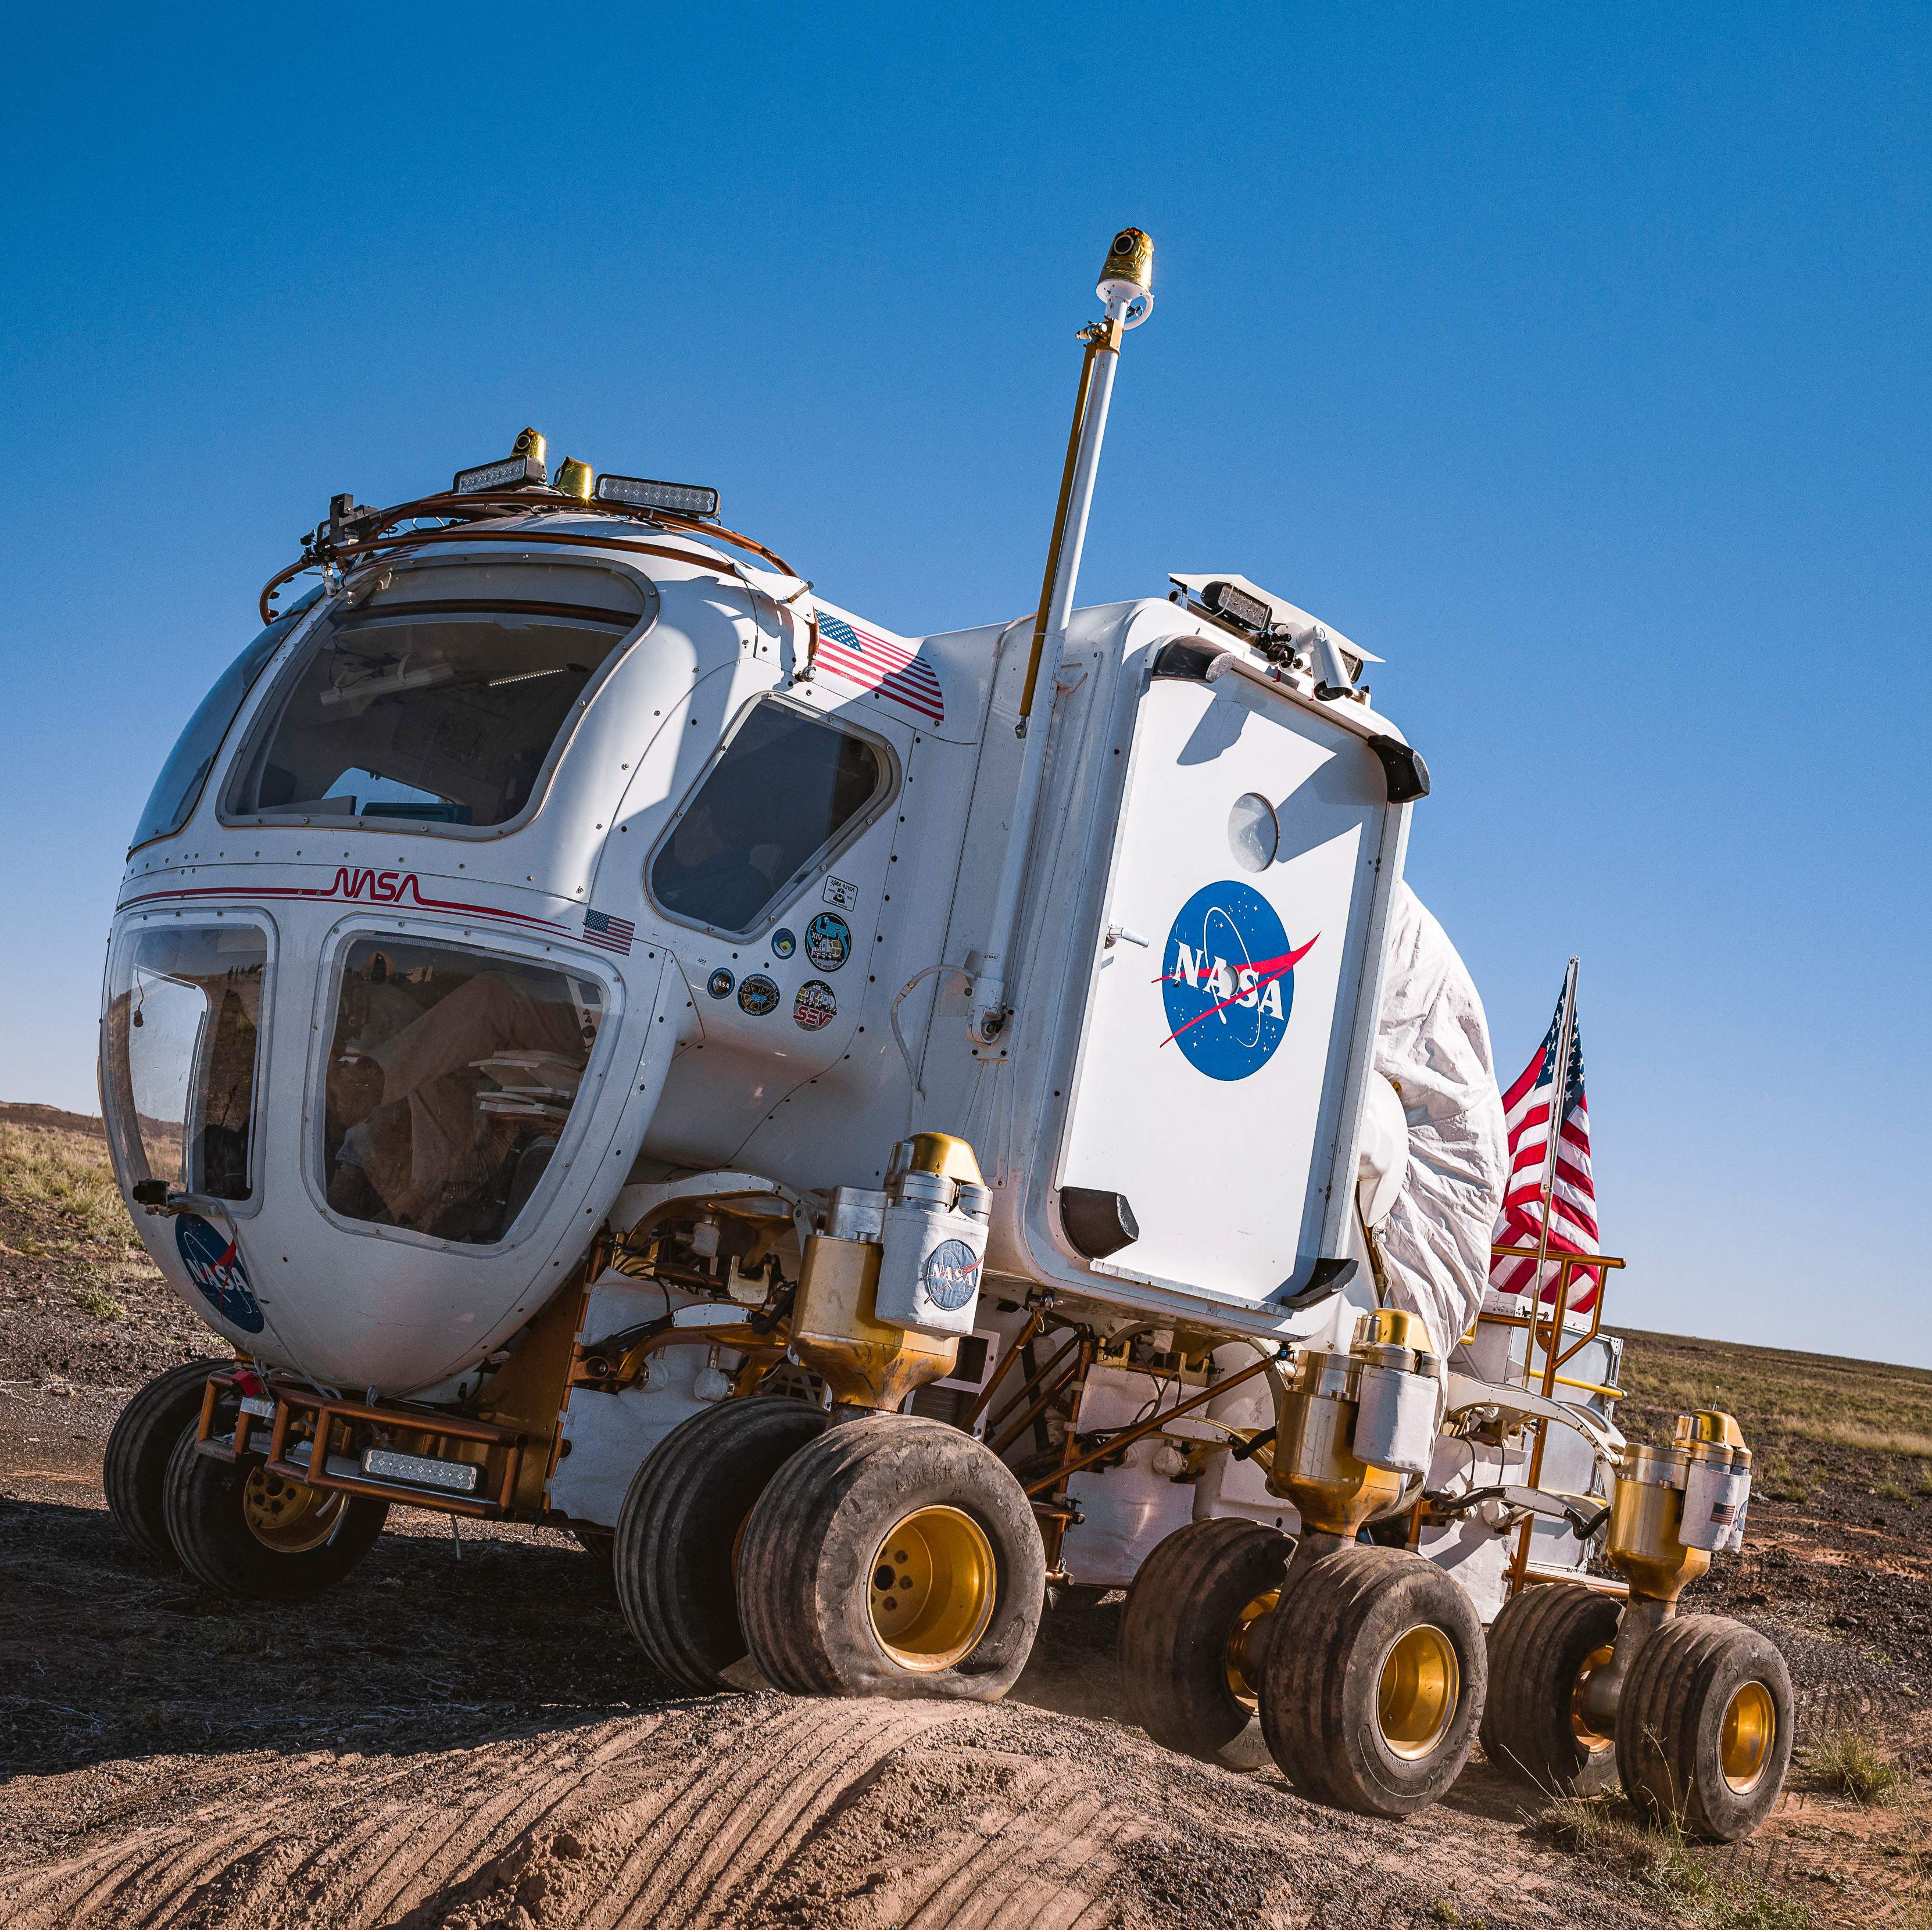 To Travel the Moon, Artemis Astronauts Need a New Set of Wheels. Check Out the Prototype